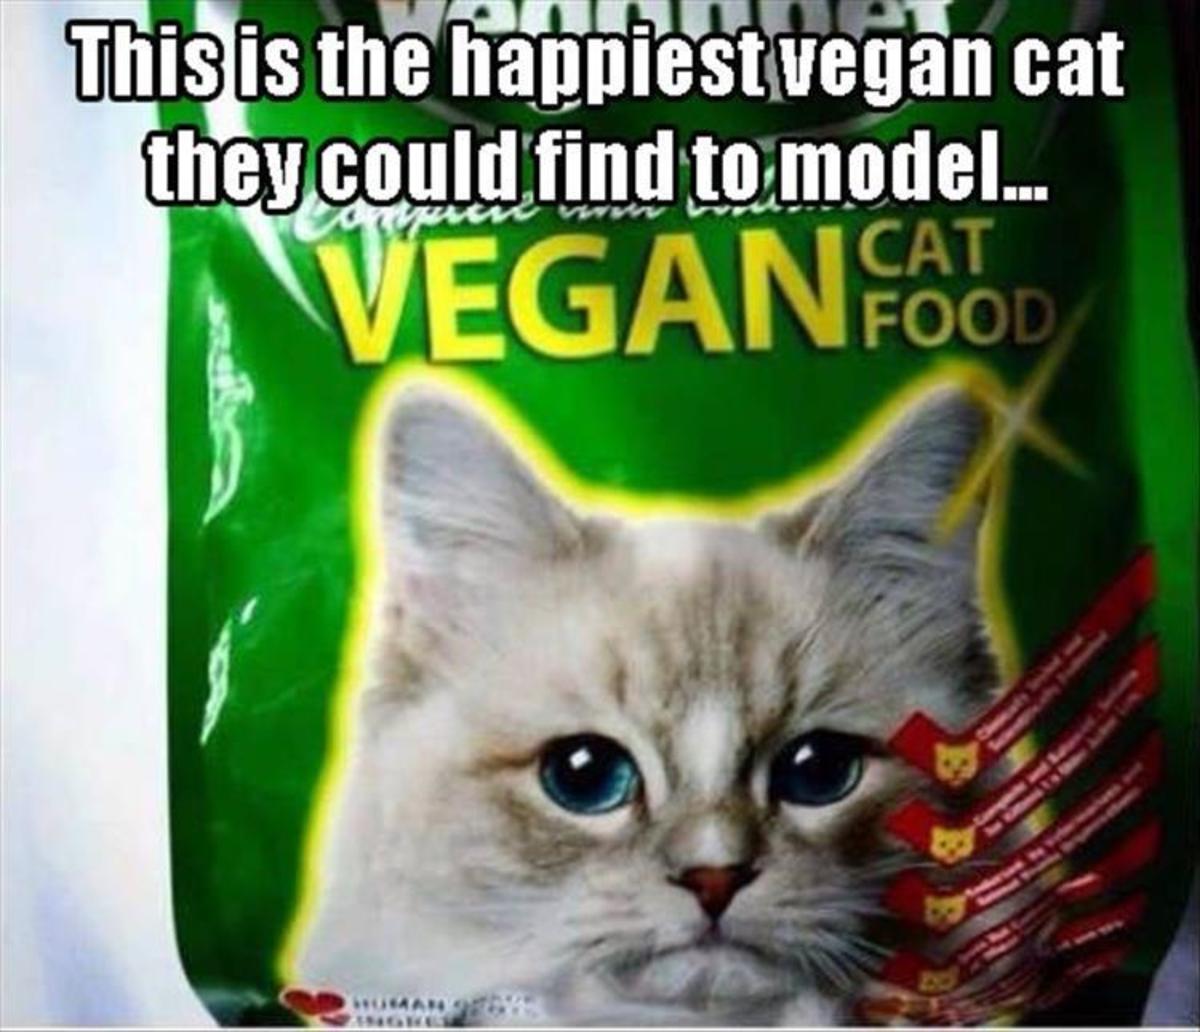 Dogs can survive on vegetables, but they will not thrive. Cats are carnivores, and forcing vegan food on a cat is hatred of cats. 